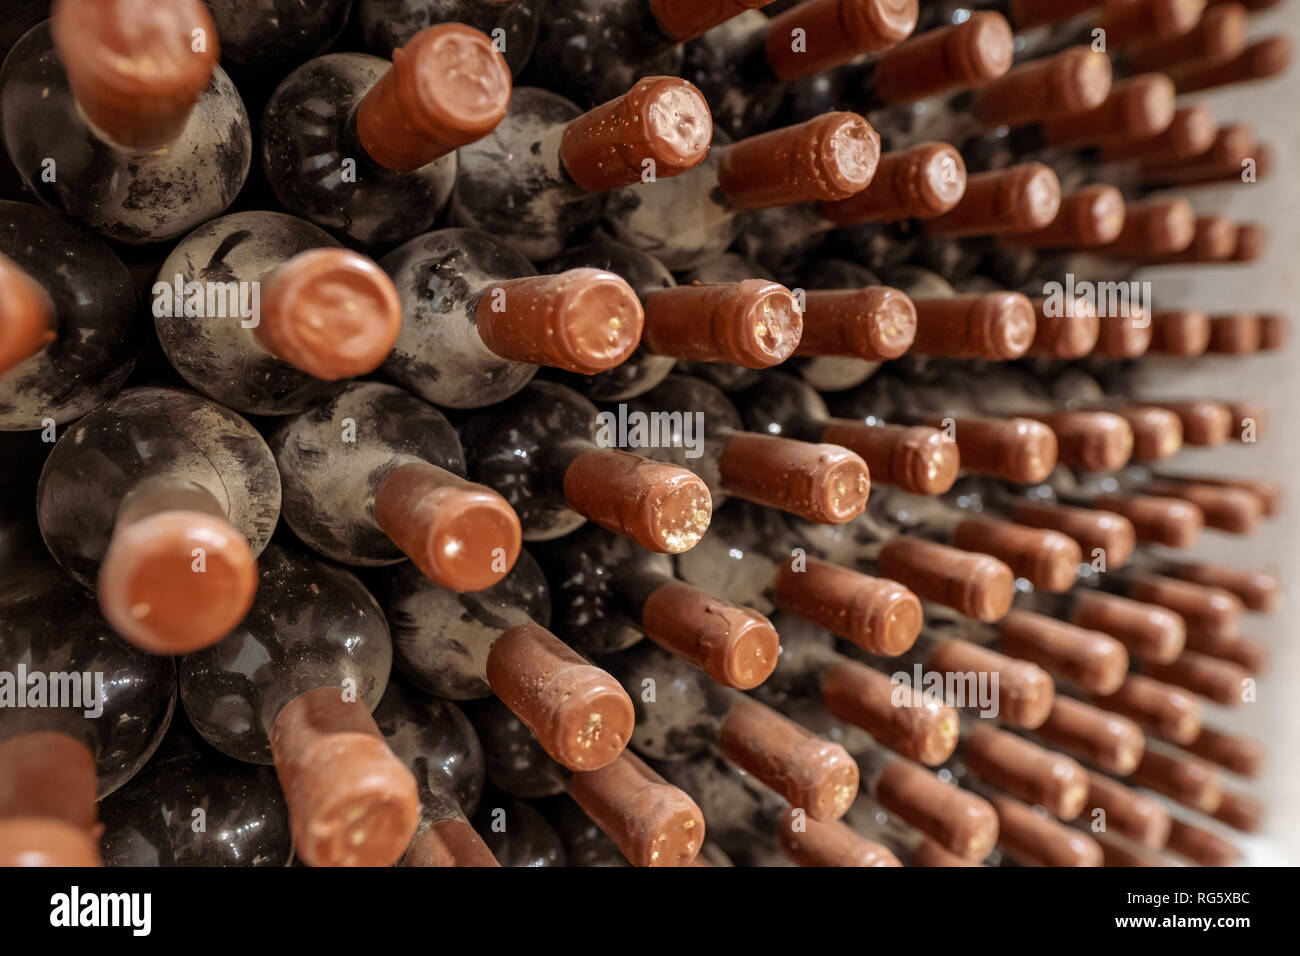 Wine aging process. Wine bottles aging, covered in dust and mold, in a traditional winery Stock Photo